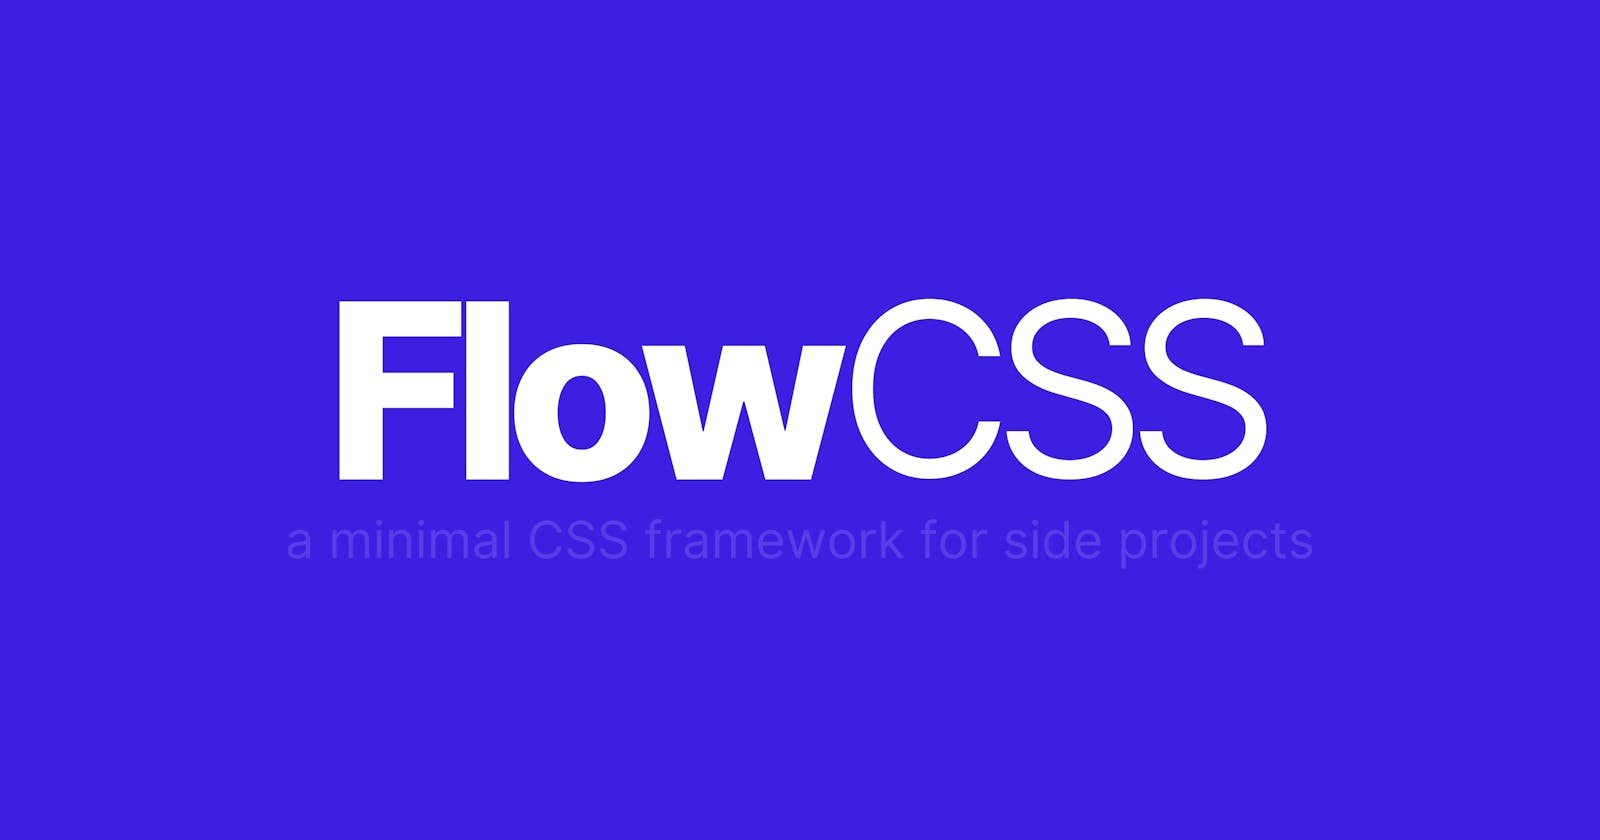 Flow, a CSS framework for lazy developers